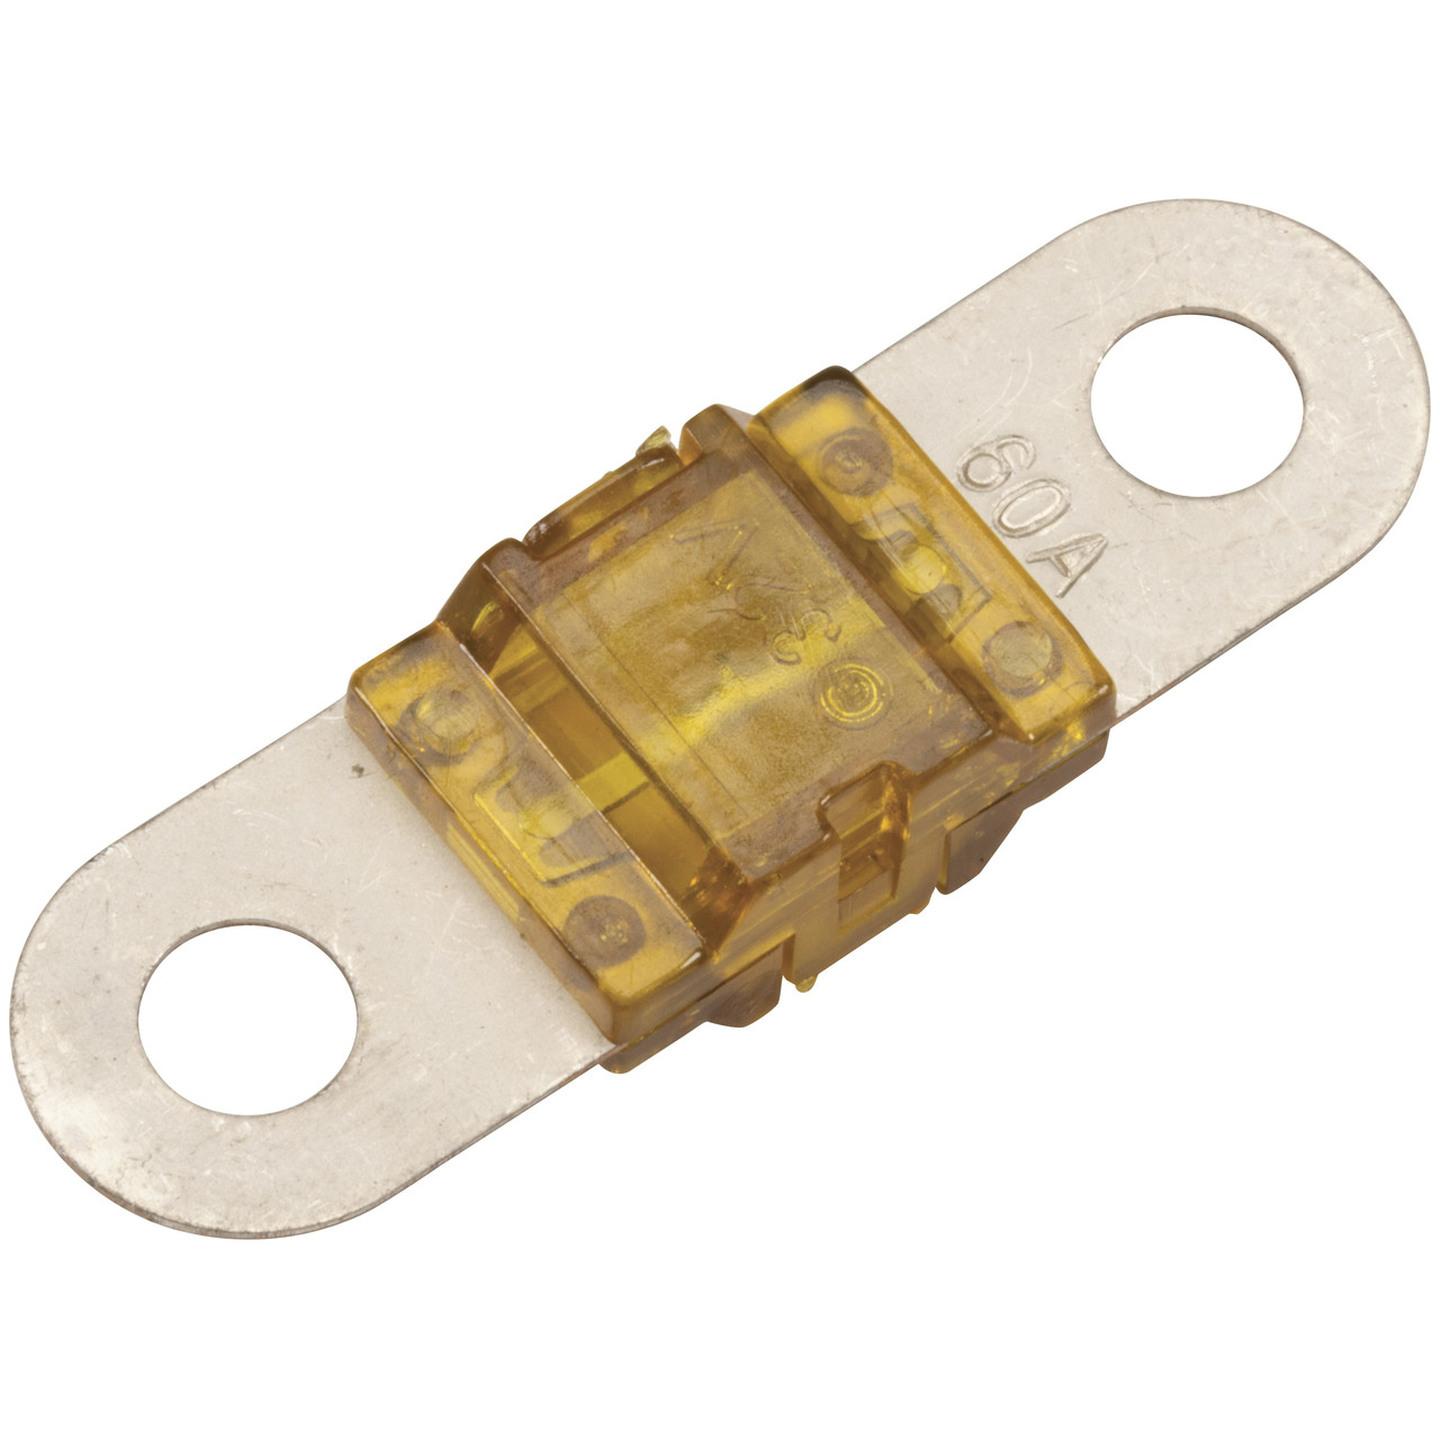 60A Yellow MIDI AMI Fuse Pack of 2